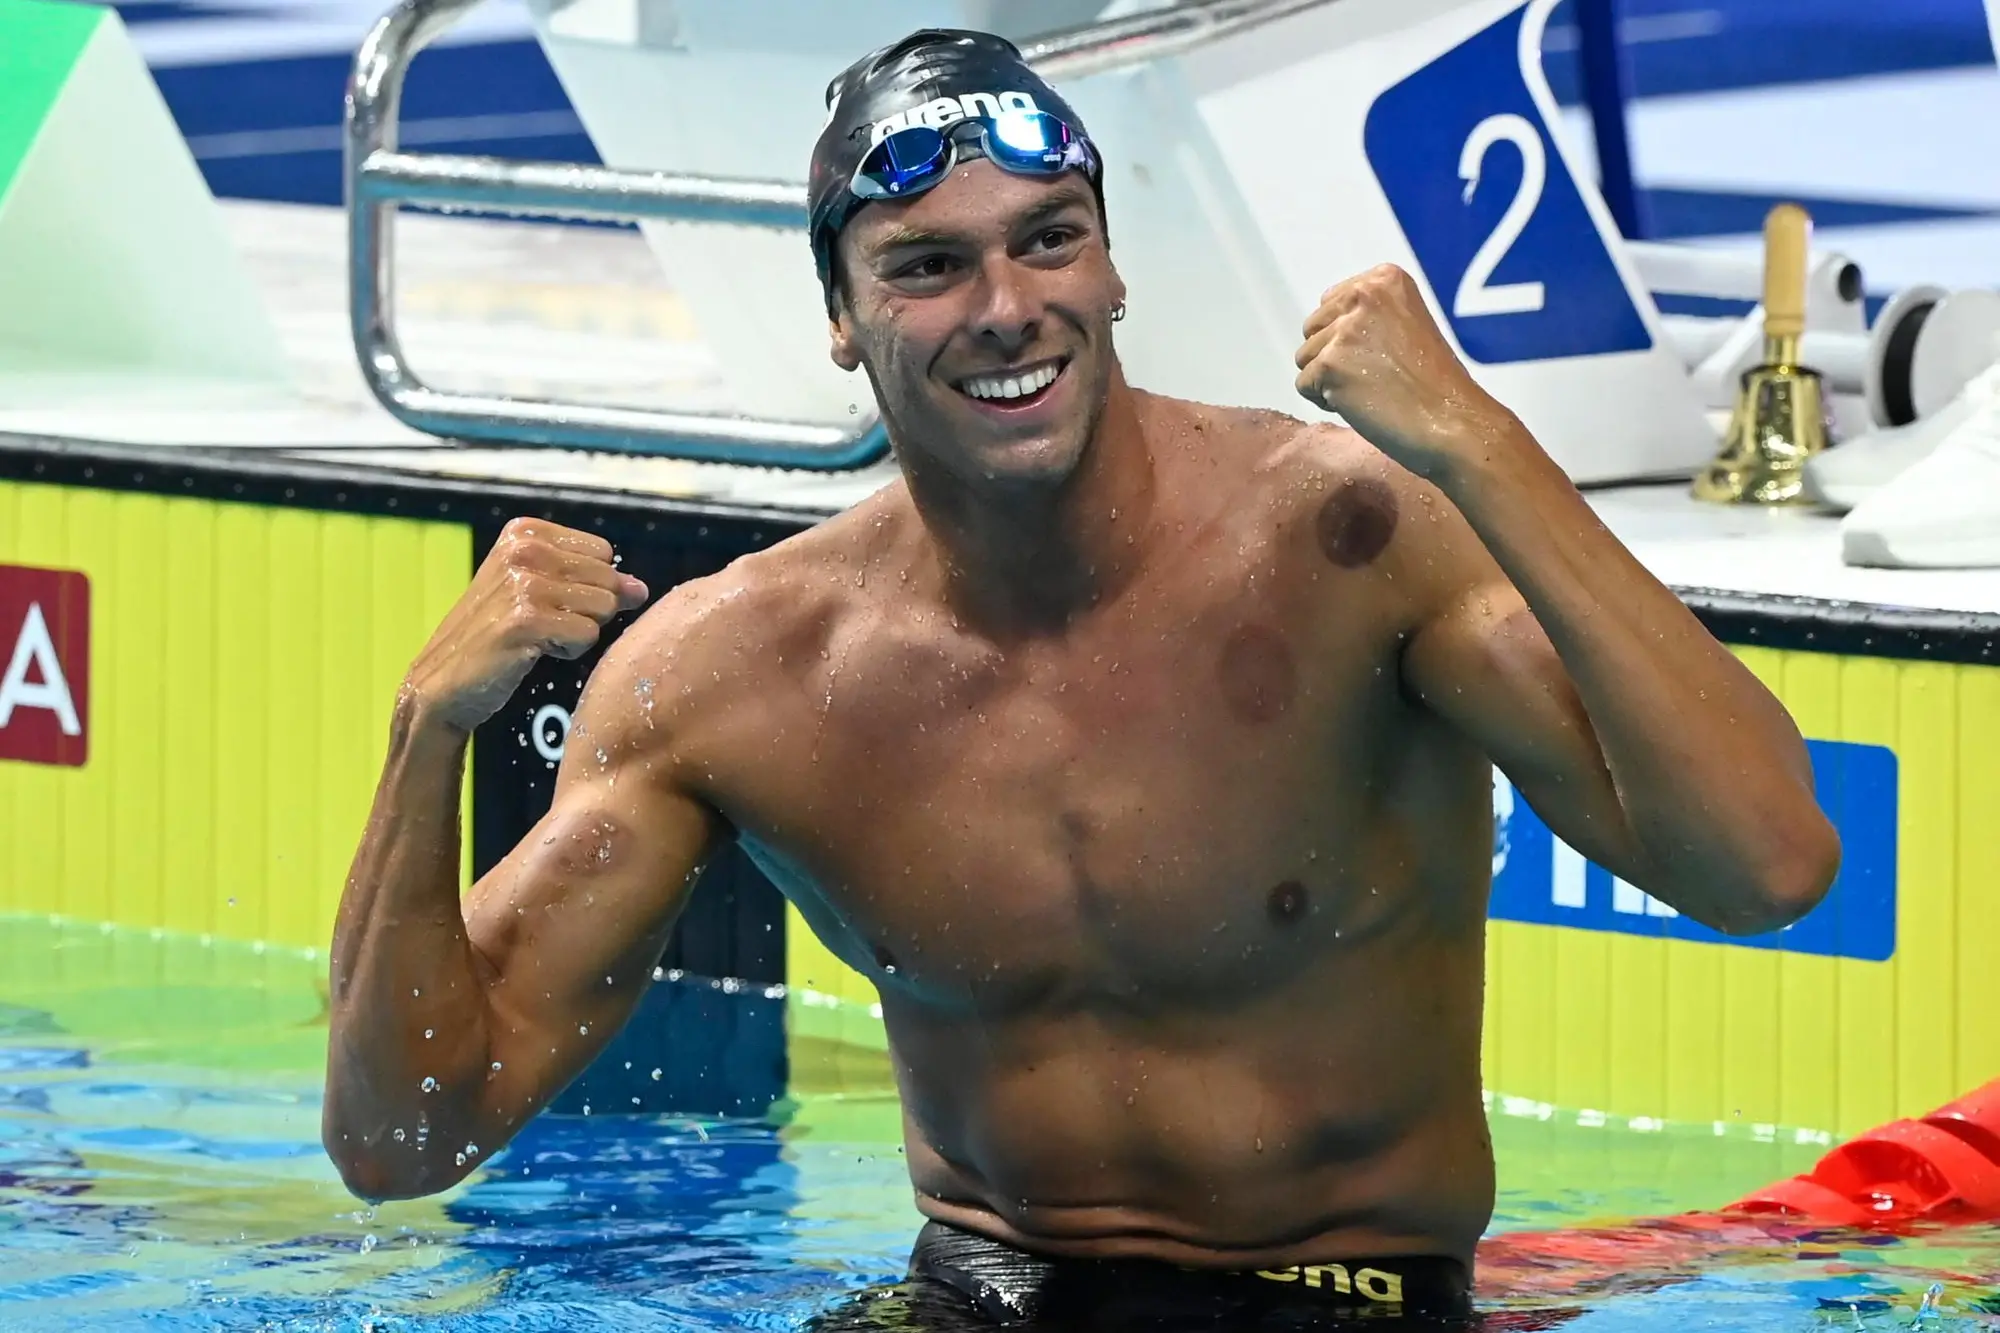 epa10033738 Gregorio Paltrinieri of Italy celebrates after winning the men’s 1500m freestyle final of the 19th FINA World Championships in Duna Arena in Budapest, Hungary, 25 June 2022. EPA/Tamas Kovacs HUNGARY OUT